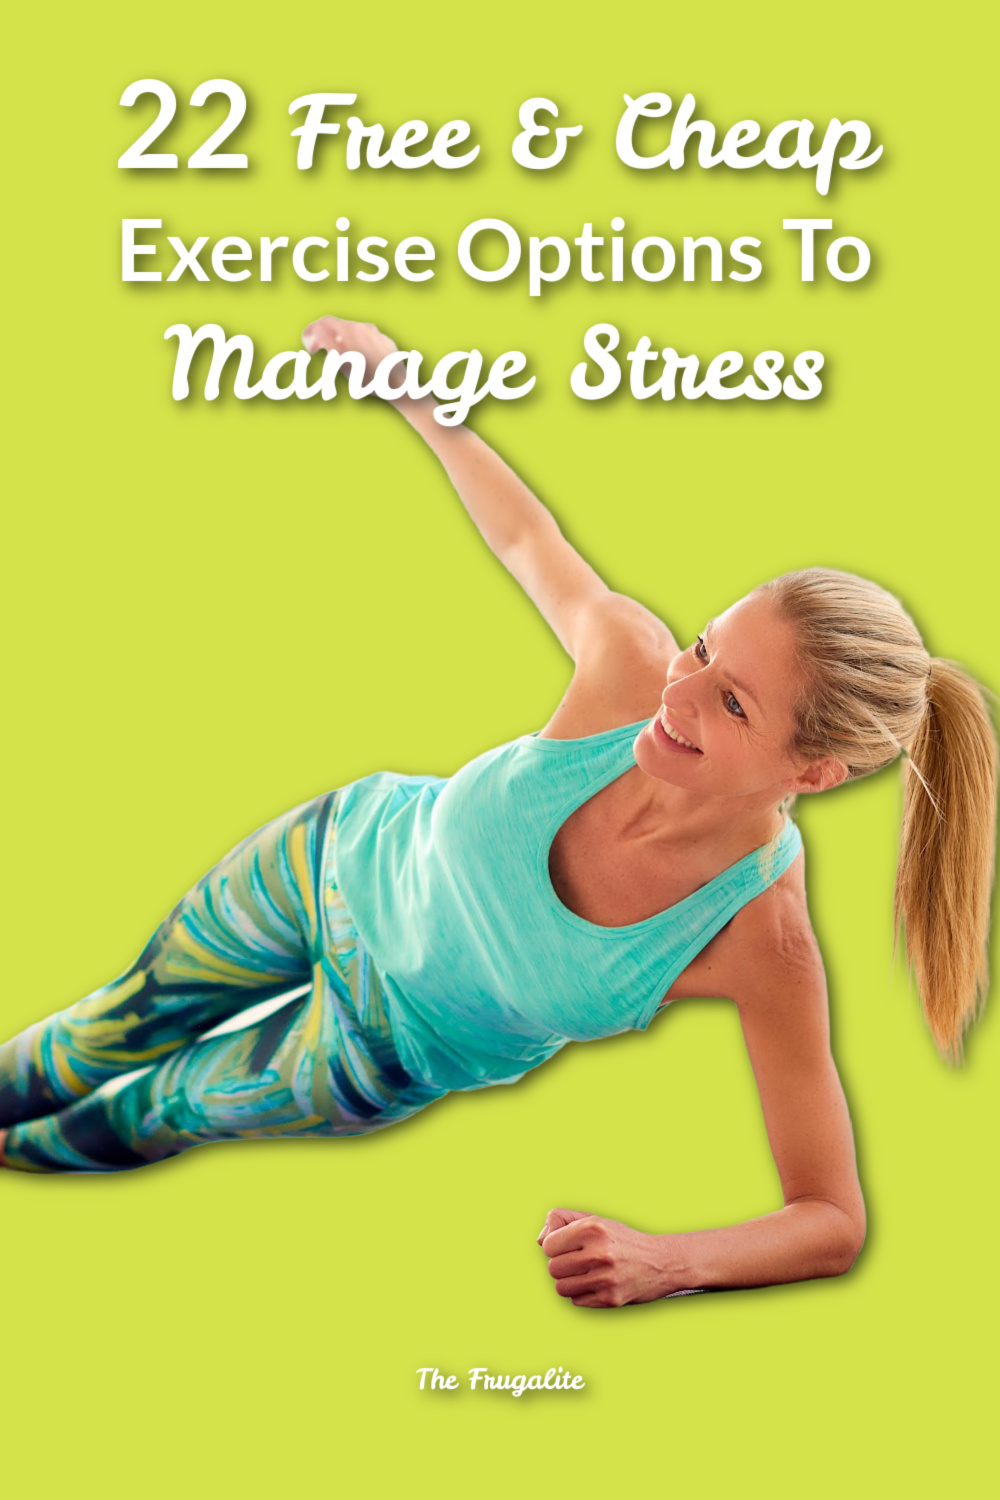 22 Free & Cheap Exercise Options To Manage Stress